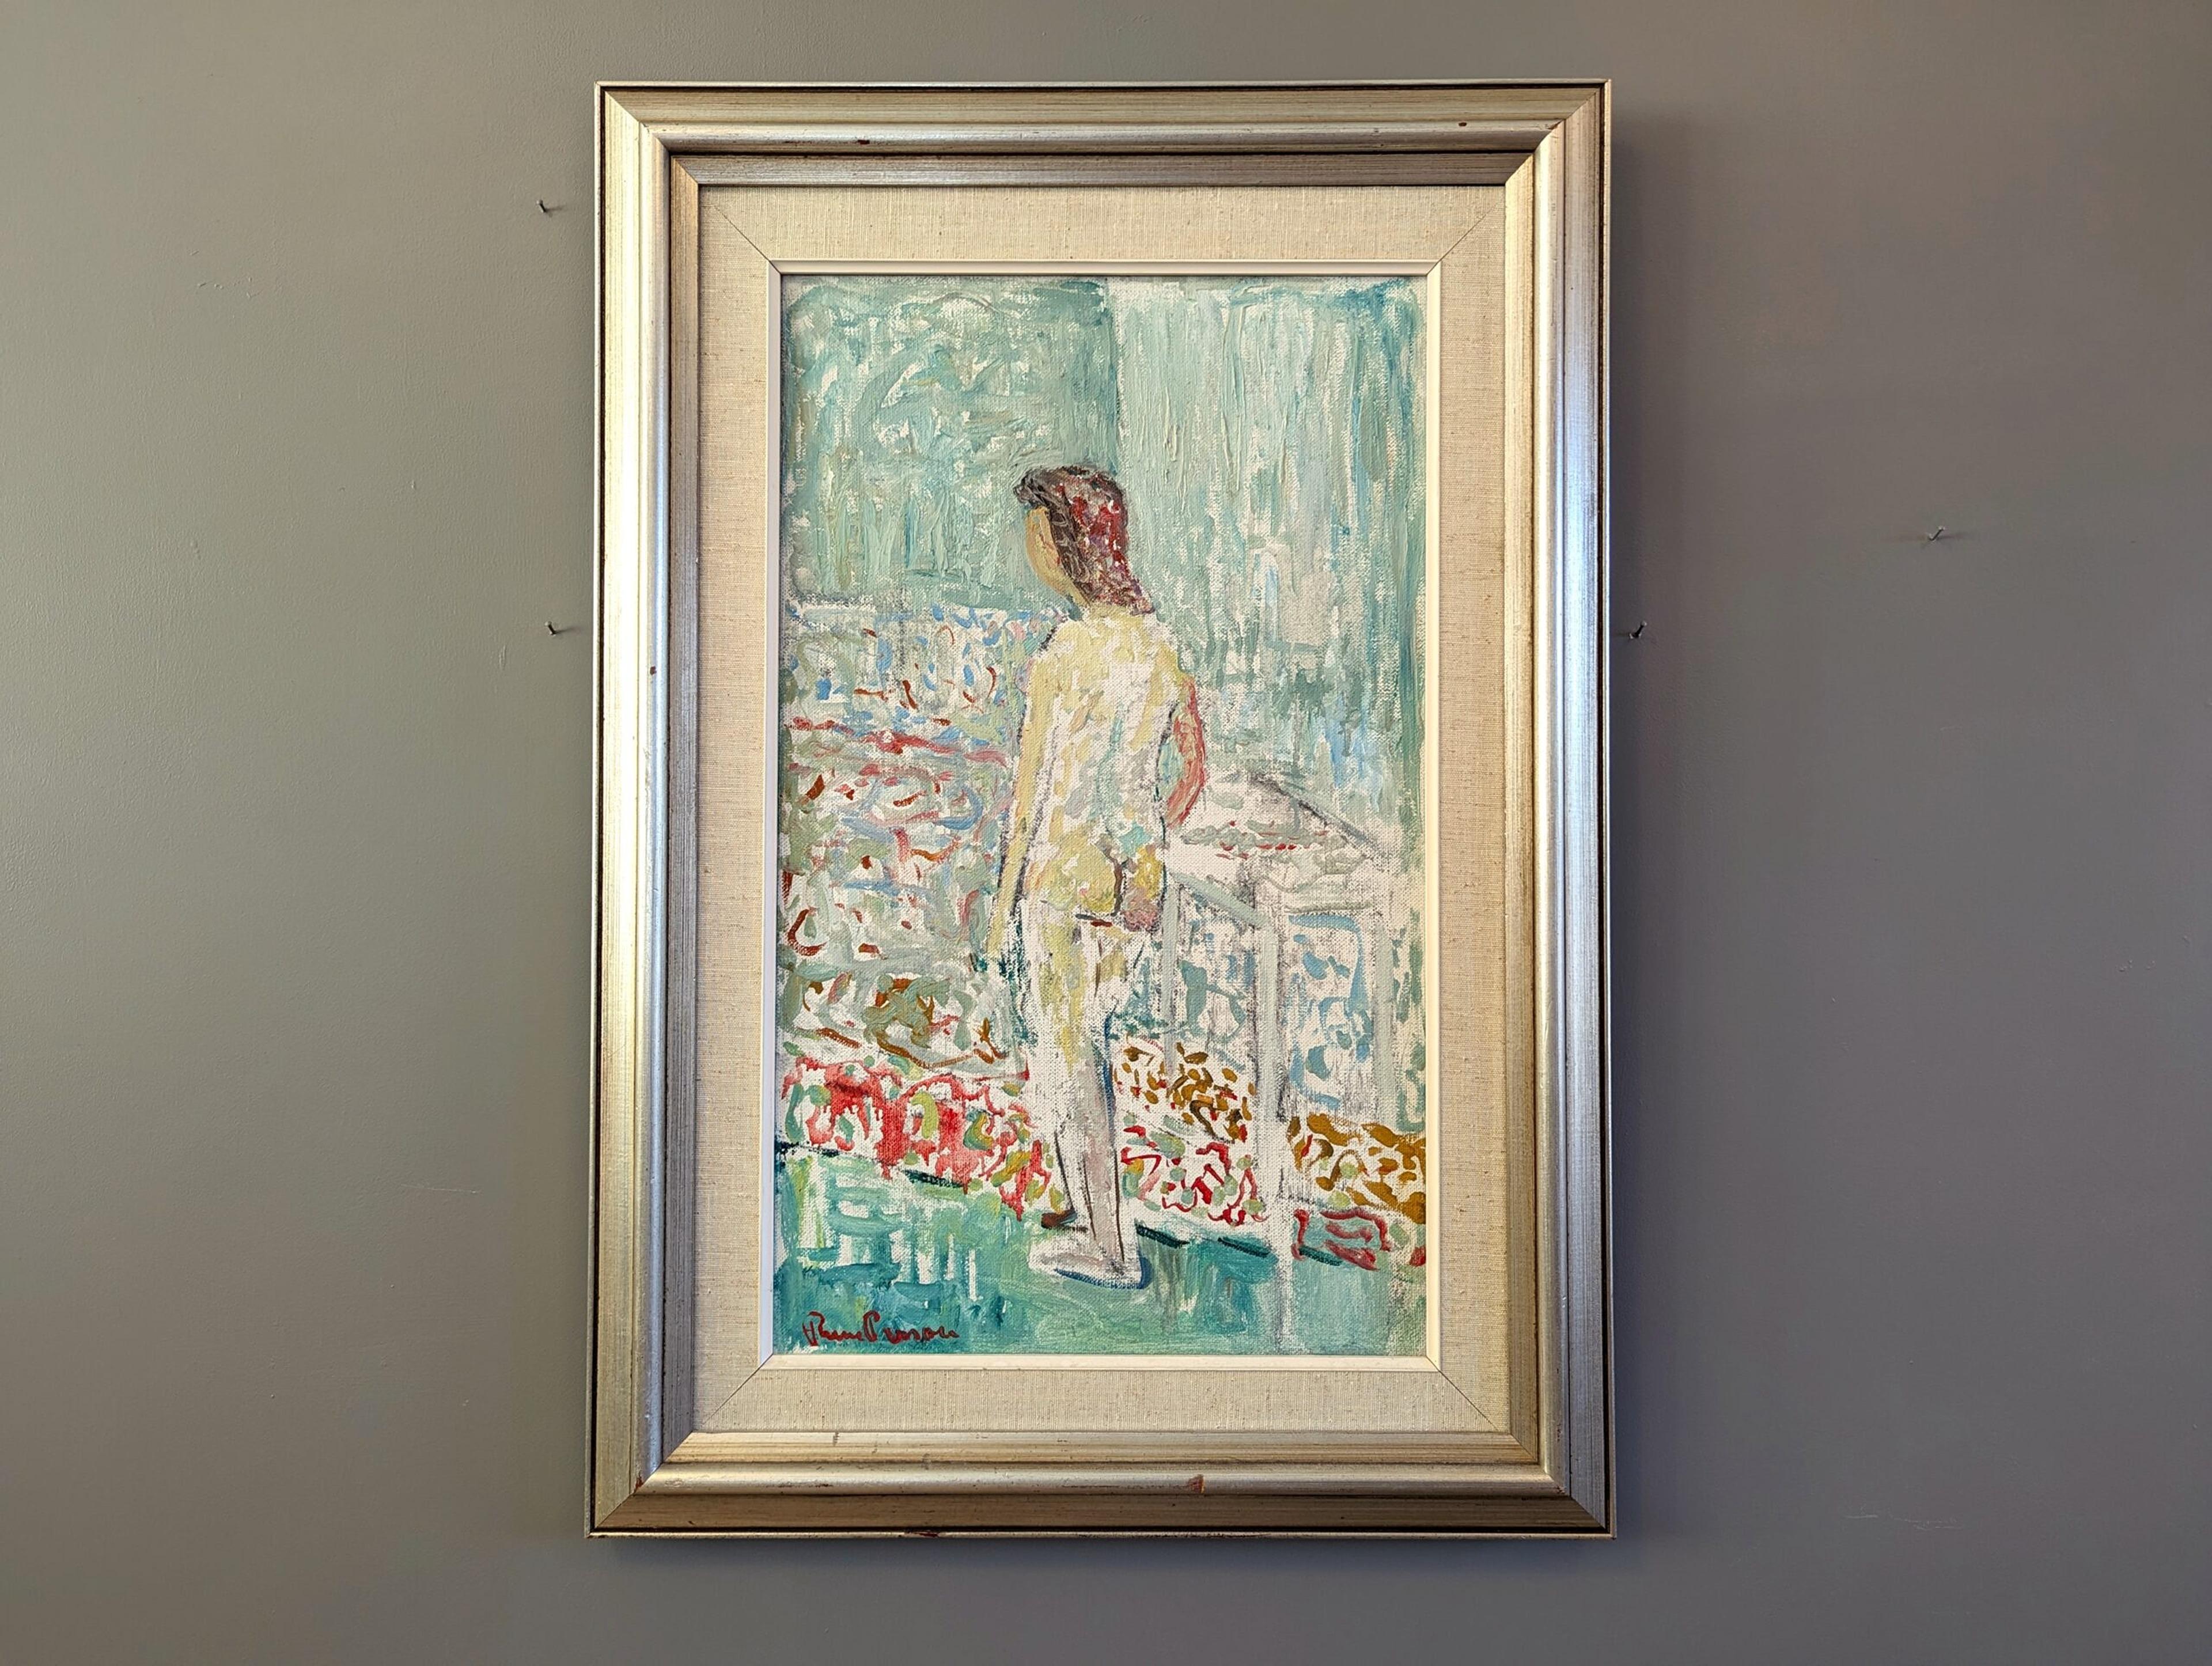 UNNOTICED
Size: 68 x 48 cm (including frame)
Oil on Canvas 

An expressive mid-century nude figurative portrait, executed in oil onto canvas.

A standing nude figure, with their back turned to the viewer and unaware of the observer’s presence,